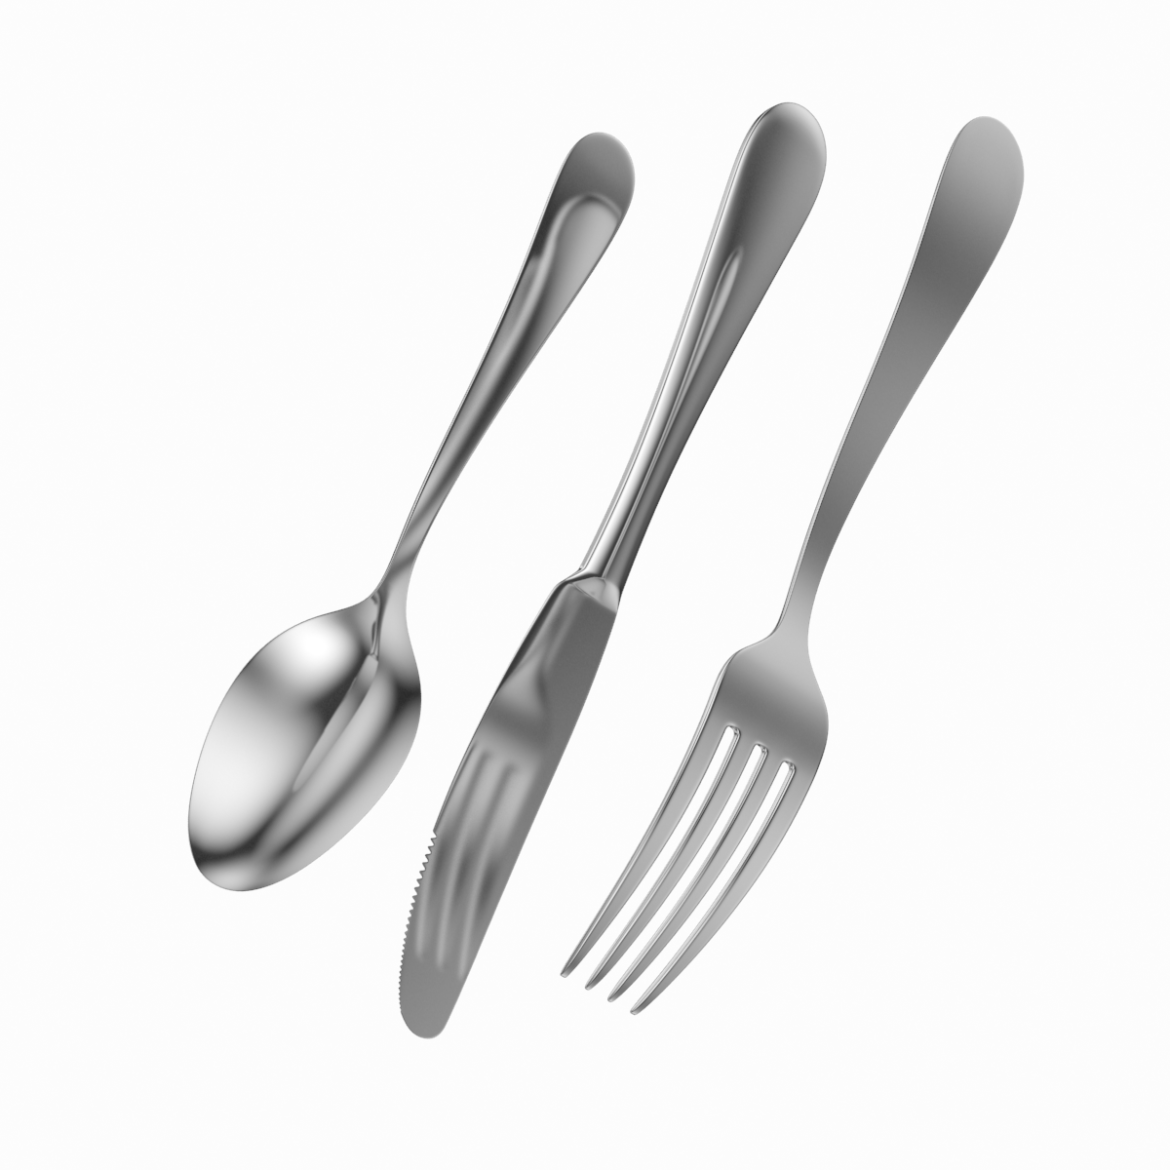  <a class="continue" href="https://www.flatpyramid.com/3d-models/furniture-3d-models/cookware-and-tableware/utensils/dessert-knife-fork-spoon-common-cutlery/">Continue Reading<span> Dessert Knife Fork Spoon Common Cutlery</span></a>